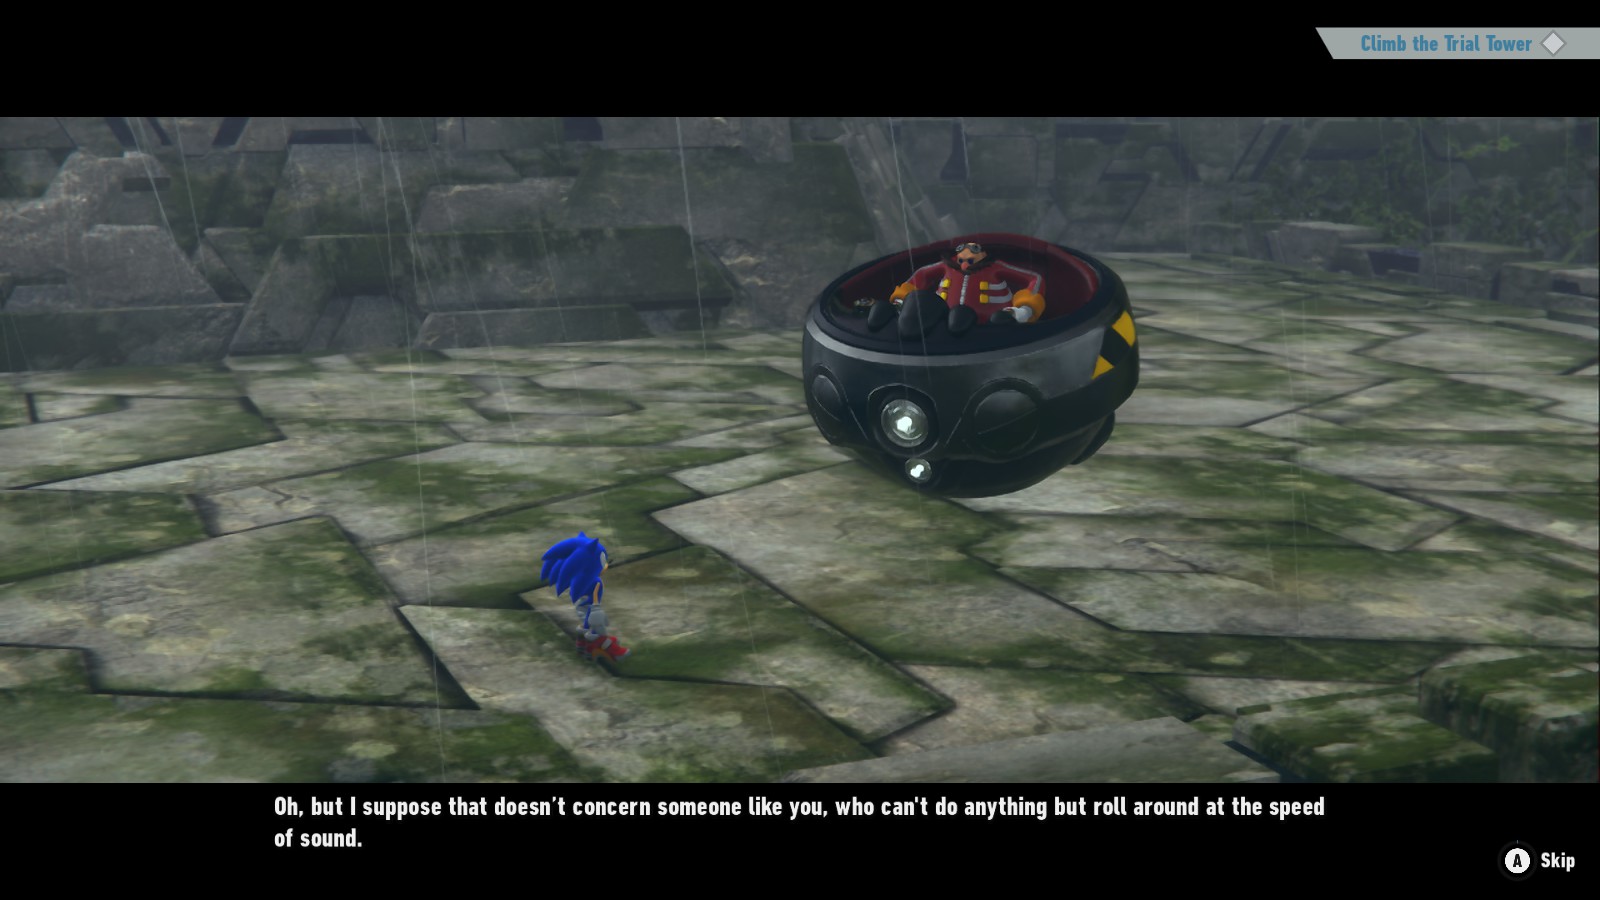 A screenshot of Sonic Frontiers. Eggman in his Eggmobile is talking to Sonic while in some ruins. The subtitle below reads: "Oh, but I suppose that doesn't concern someone like you, who can't do anything but roll around at the speed of sound."